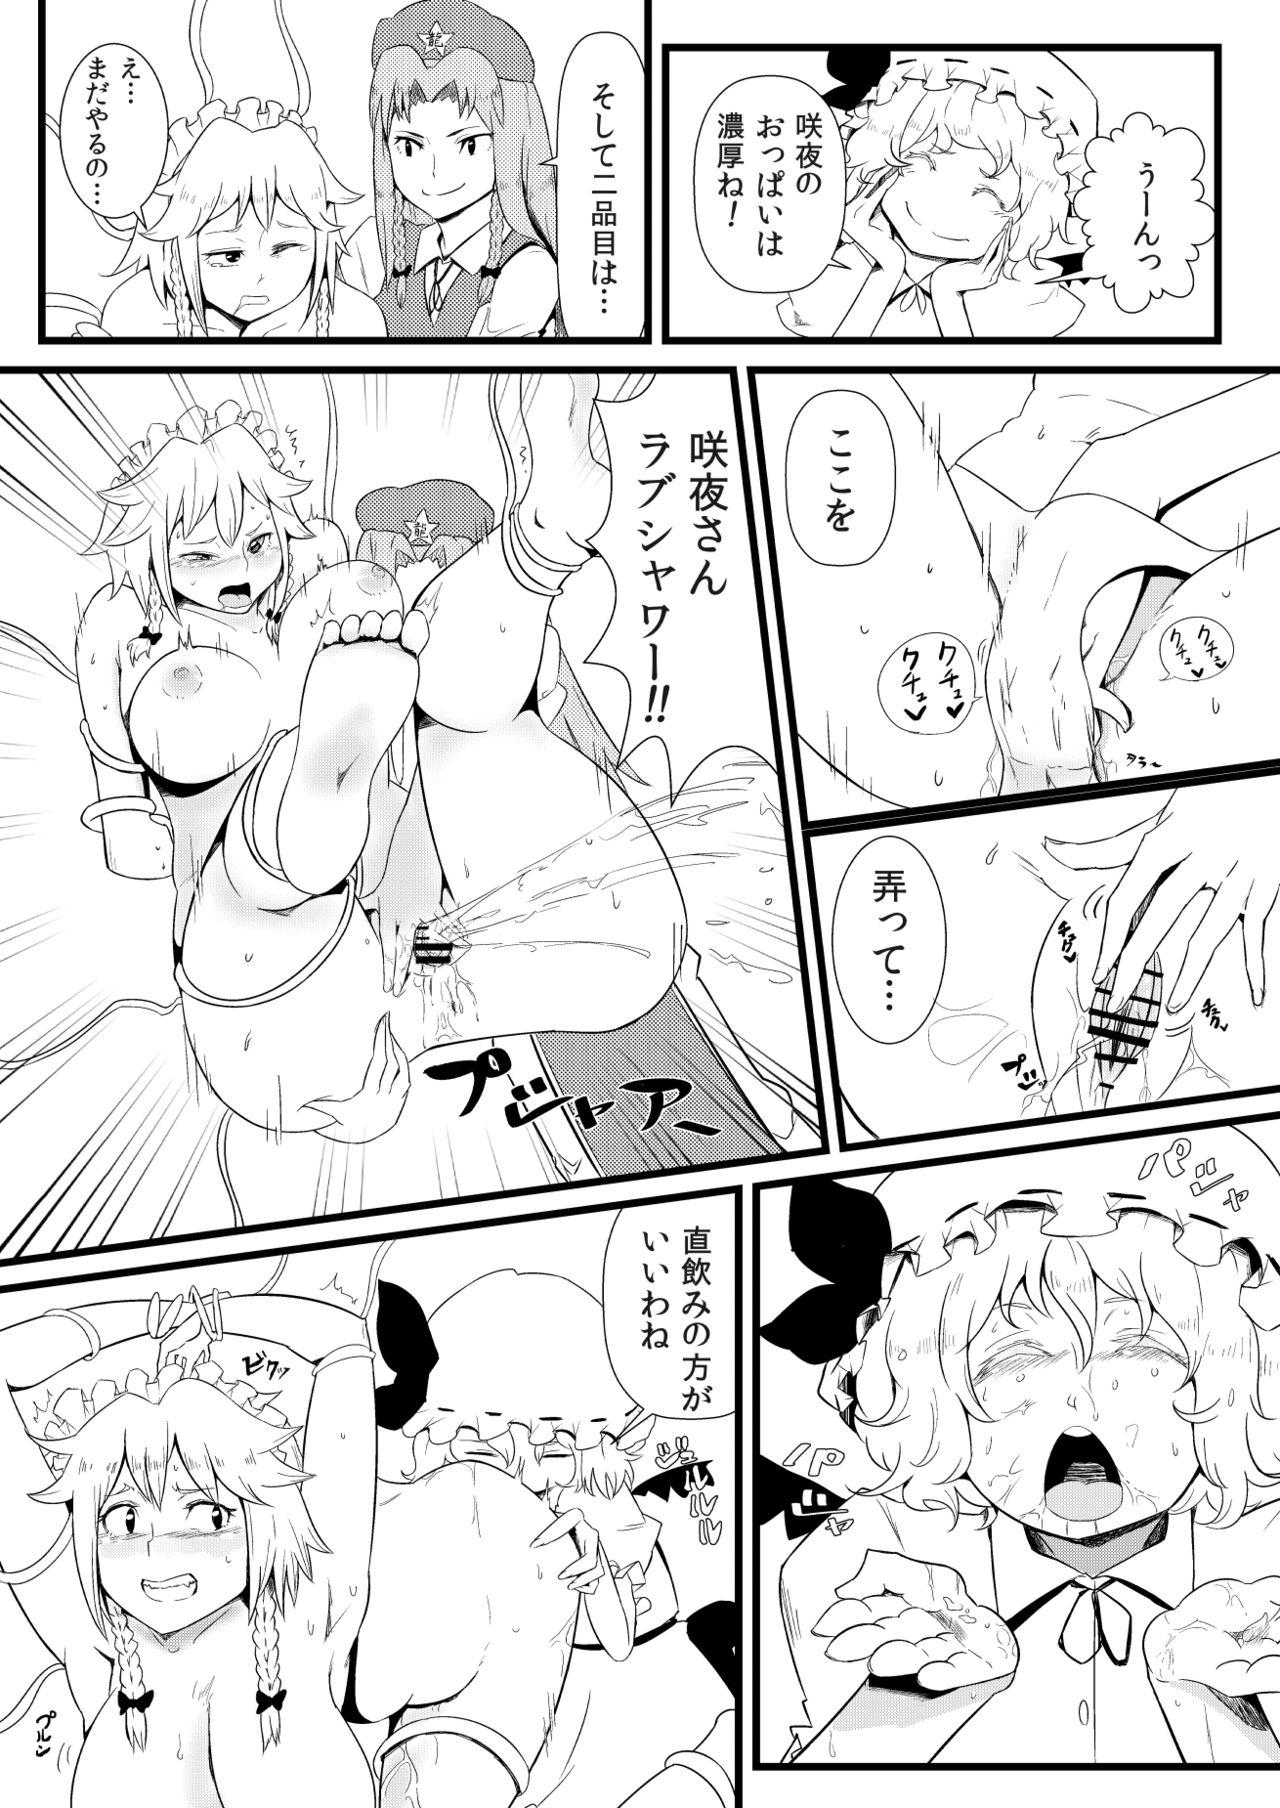 Smalltits 東方板としあき合同誌5 - Touhou project Spain - Page 7